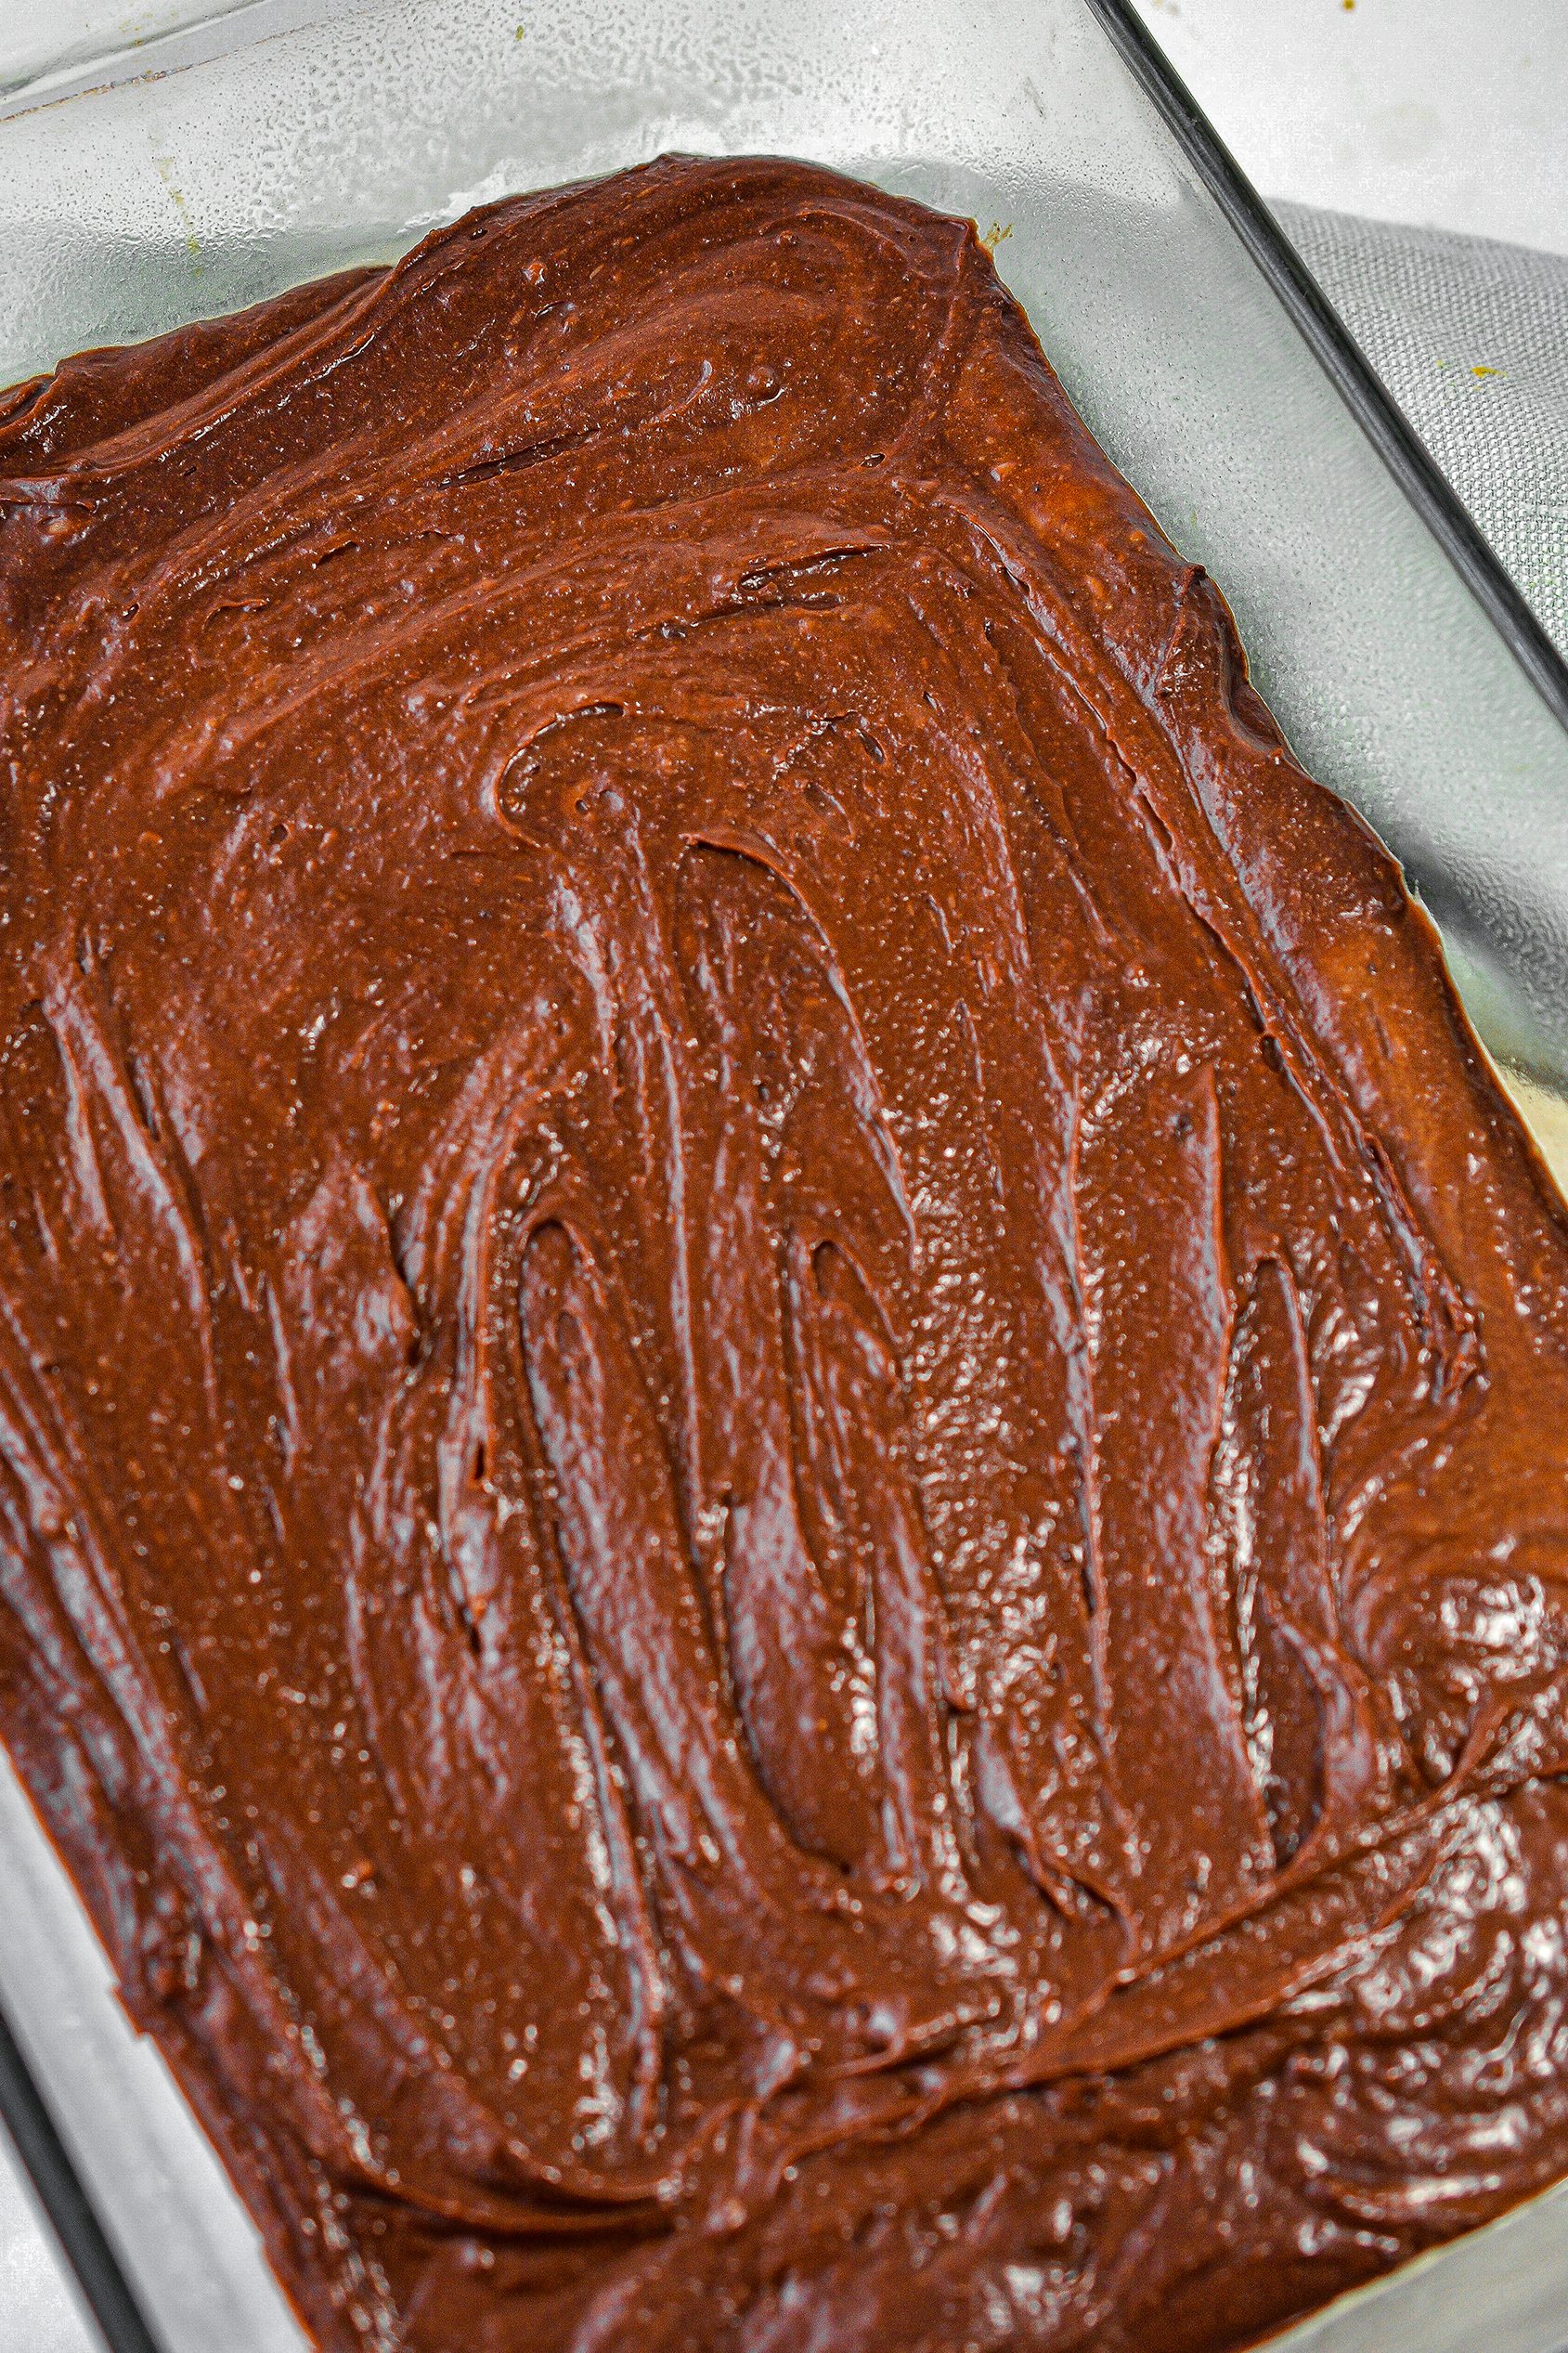 Spread the brownie mixture into the bottom of a well-greased 9x13 baking dish.